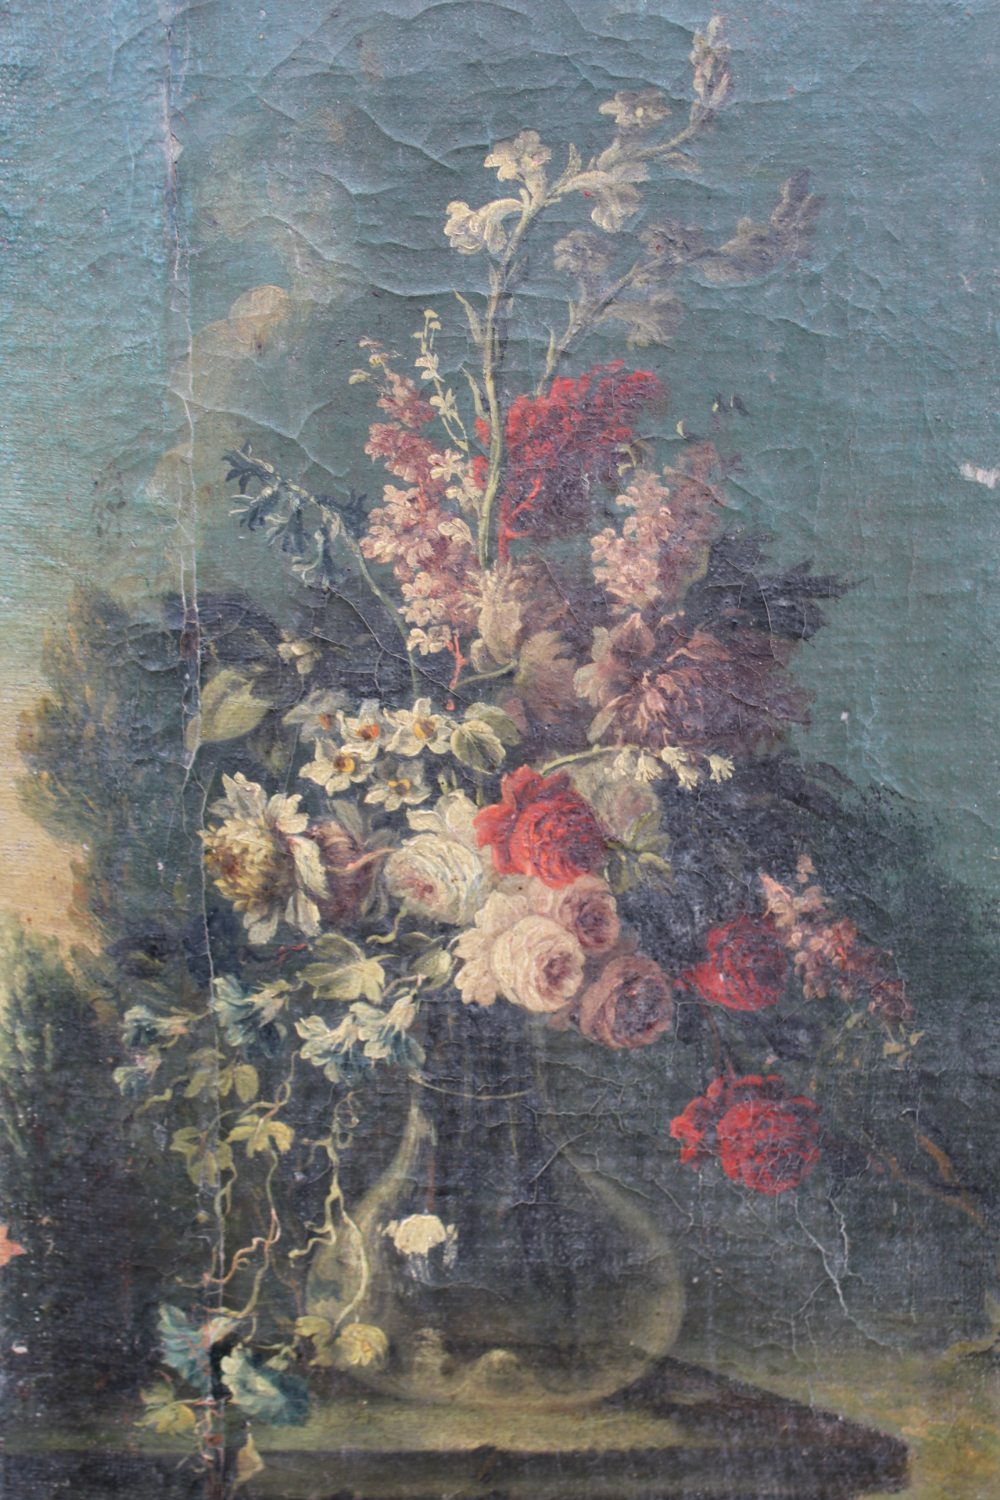 CIRCLE OF FRANCESCO LAVAGNA (18TH CENTURY). Flowers in a glass vase in an open landscape with - Image 3 of 7